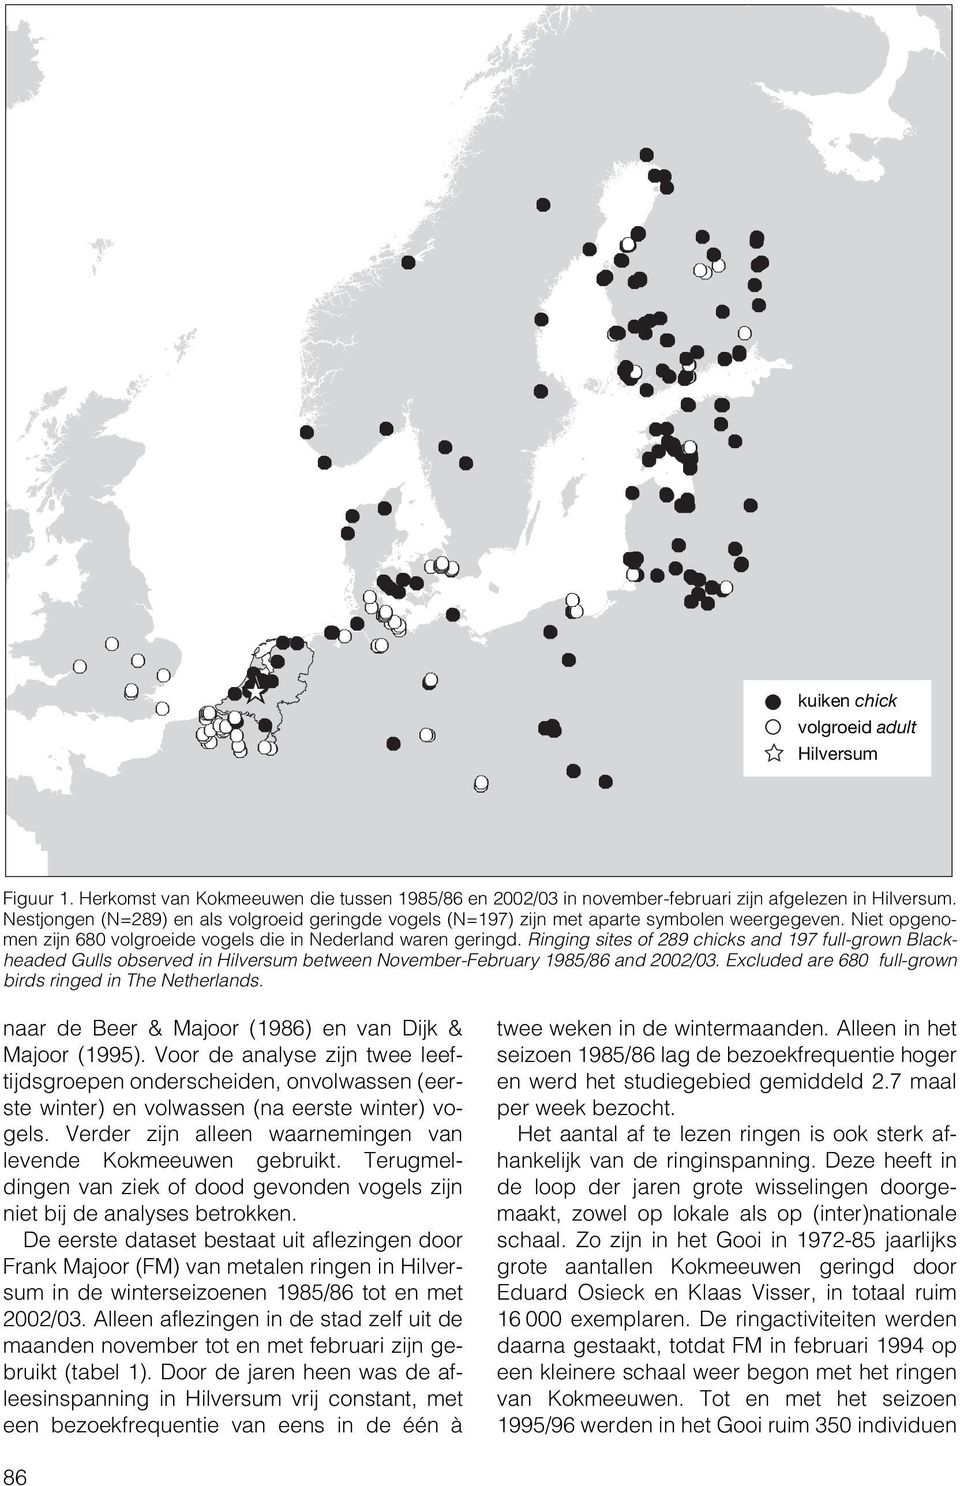 Ringing sites of 289 chicks and 197 full-grown Blackheaded Gulls observed in Hilversum between November-February 1985/86 and 22/3. Excluded are 68 full-grown birds ringed in The Netherlands.